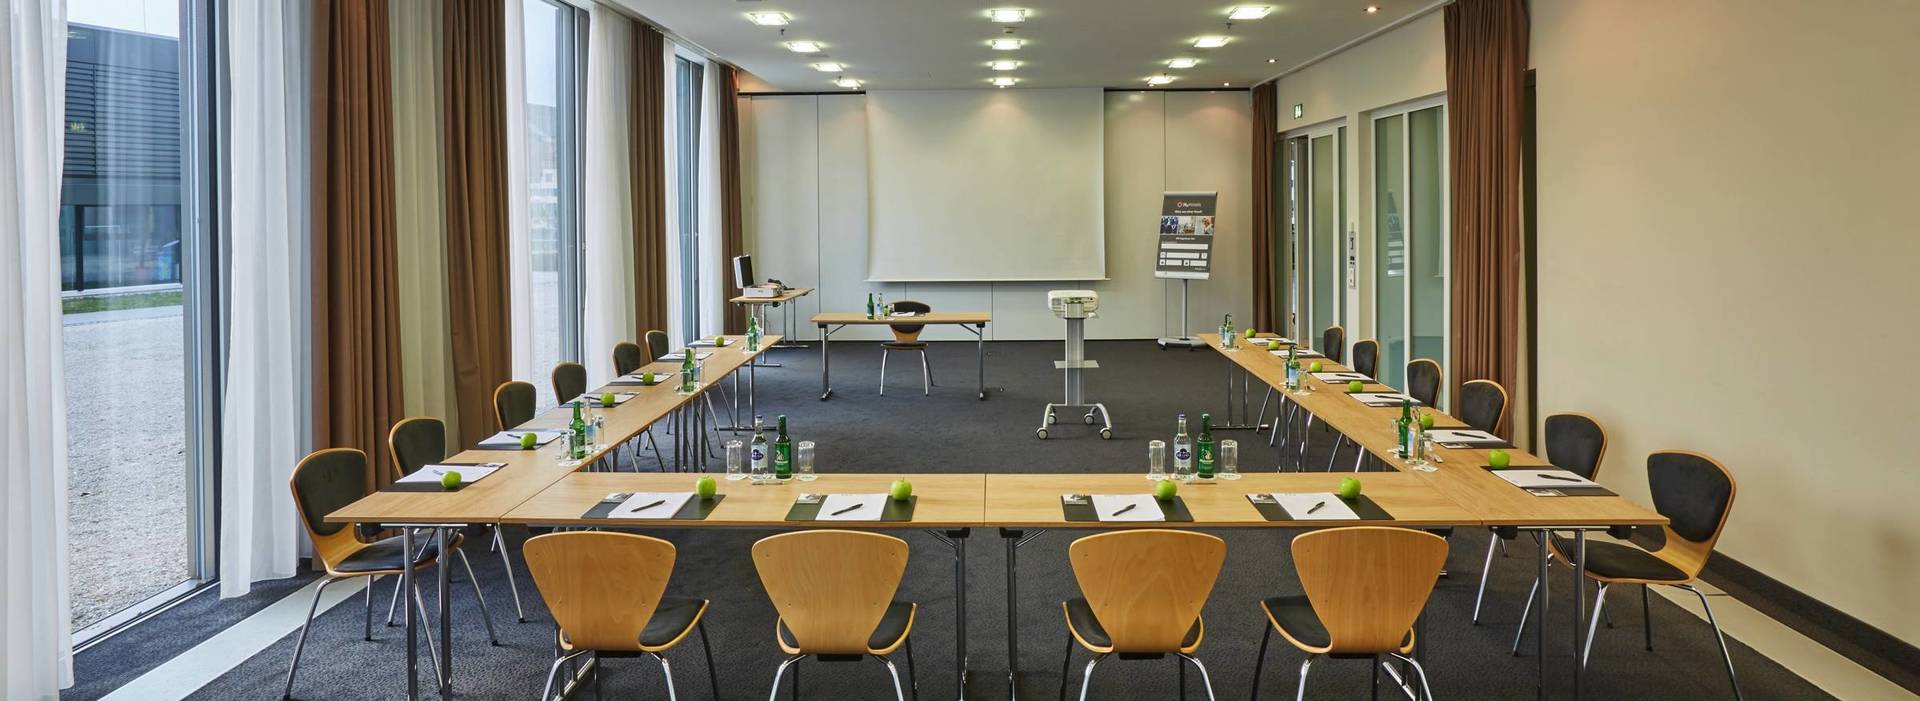 Fully equipped meeting rooms at the H4 Hotel Solothurn - Official website